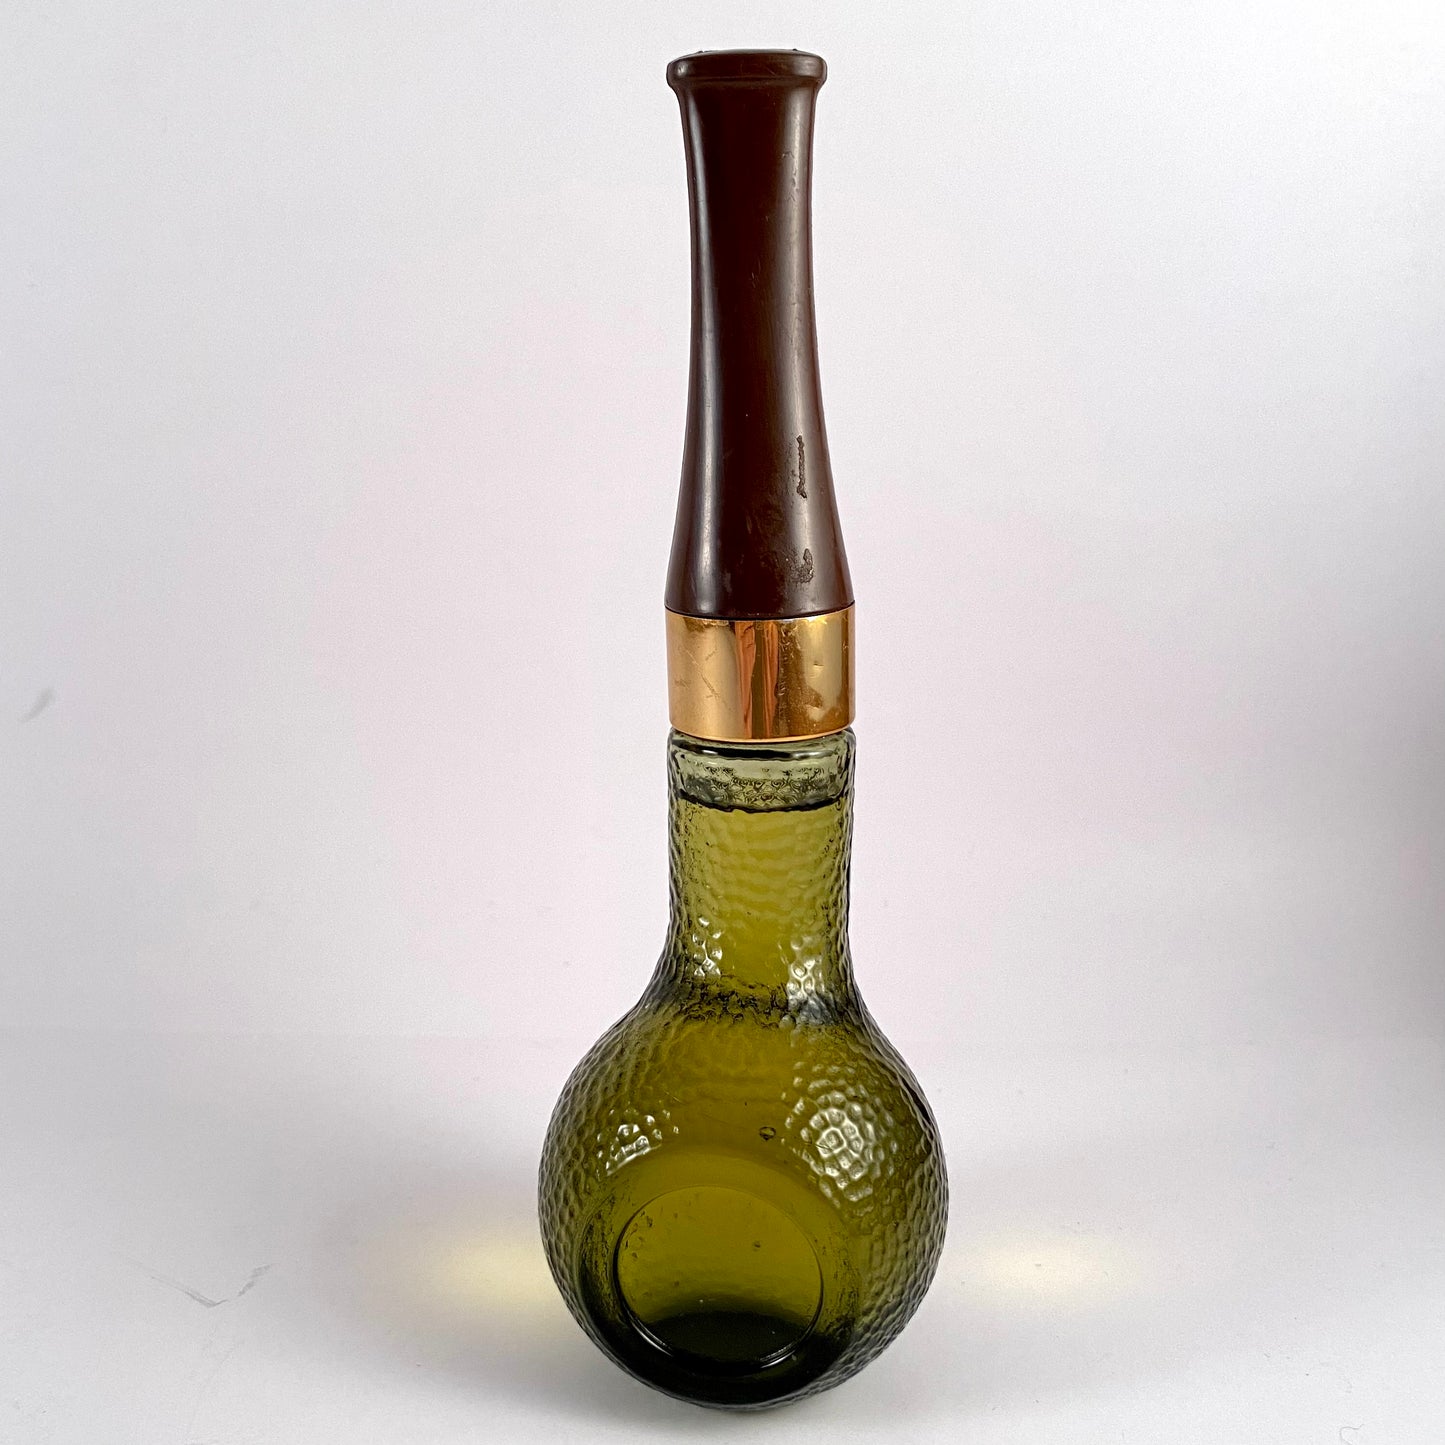 1971-1972 Avon Traditional Tobacco Pipe Bottle- Filled